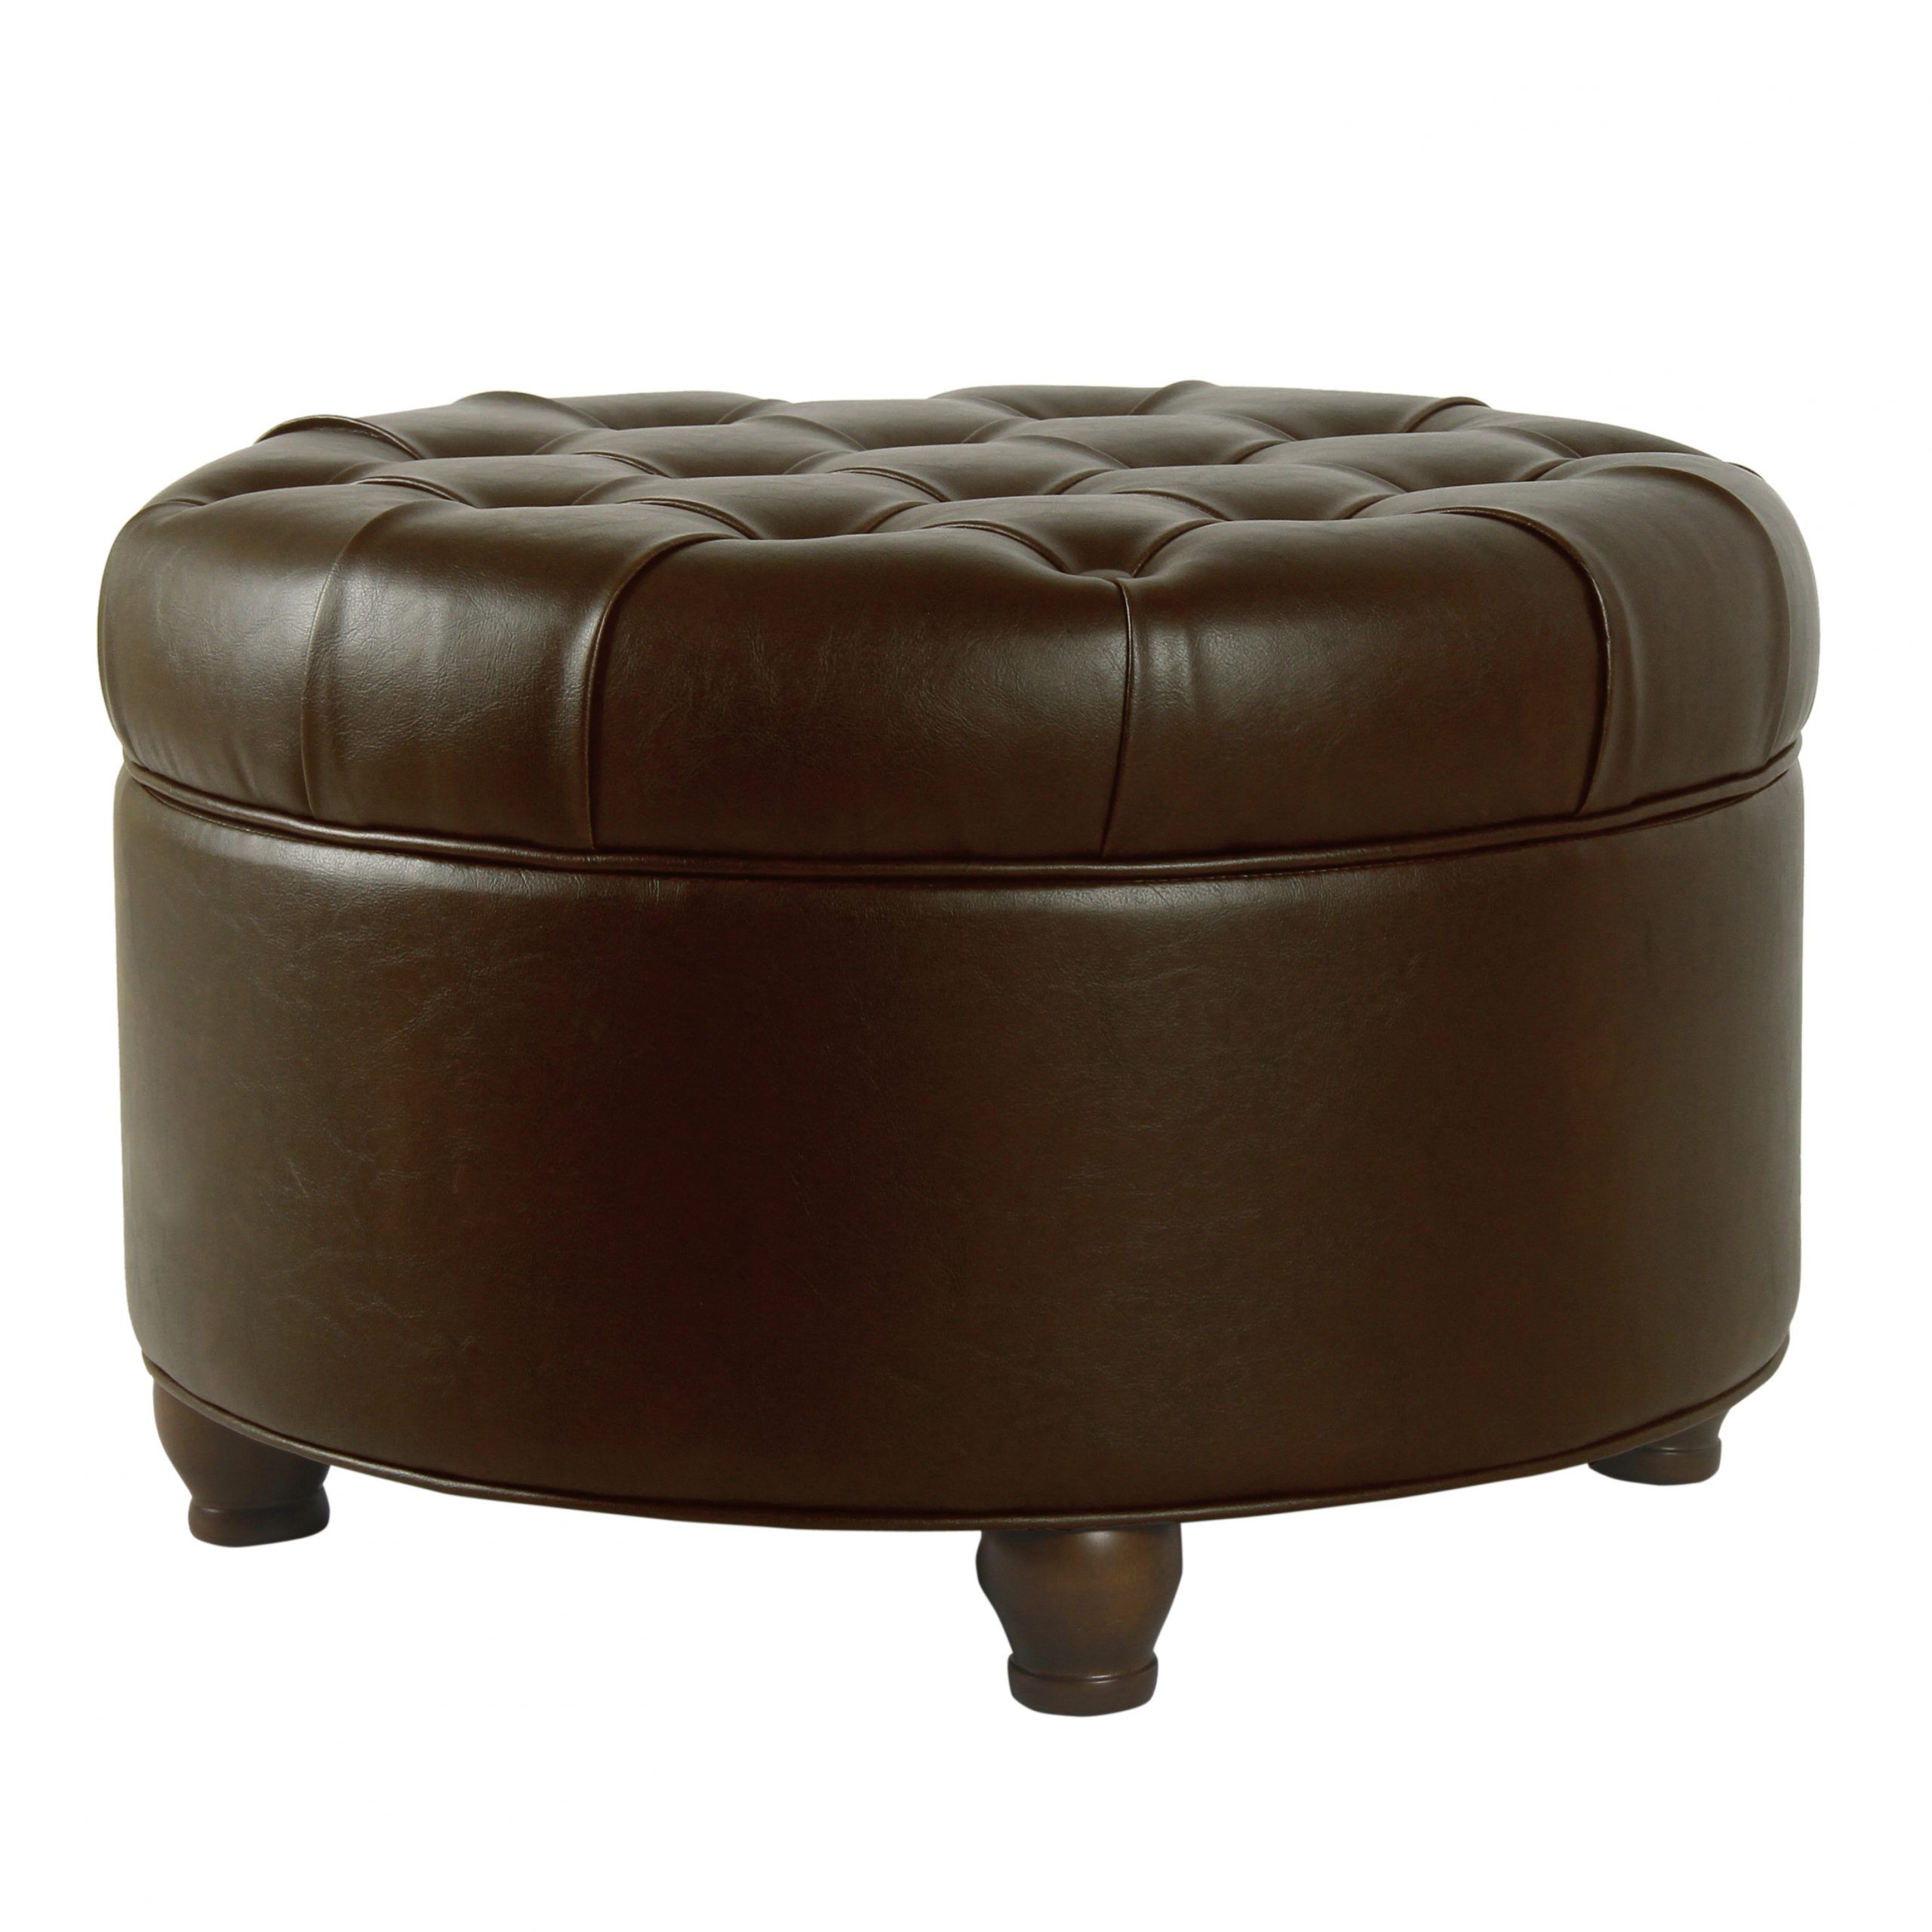 Homepop Large Tufted Round Storage Ottoman, Multiple Colors – Walmart Throughout Favorite Orange Tufted Faux Leather Storage Ottomans (View 2 of 10)